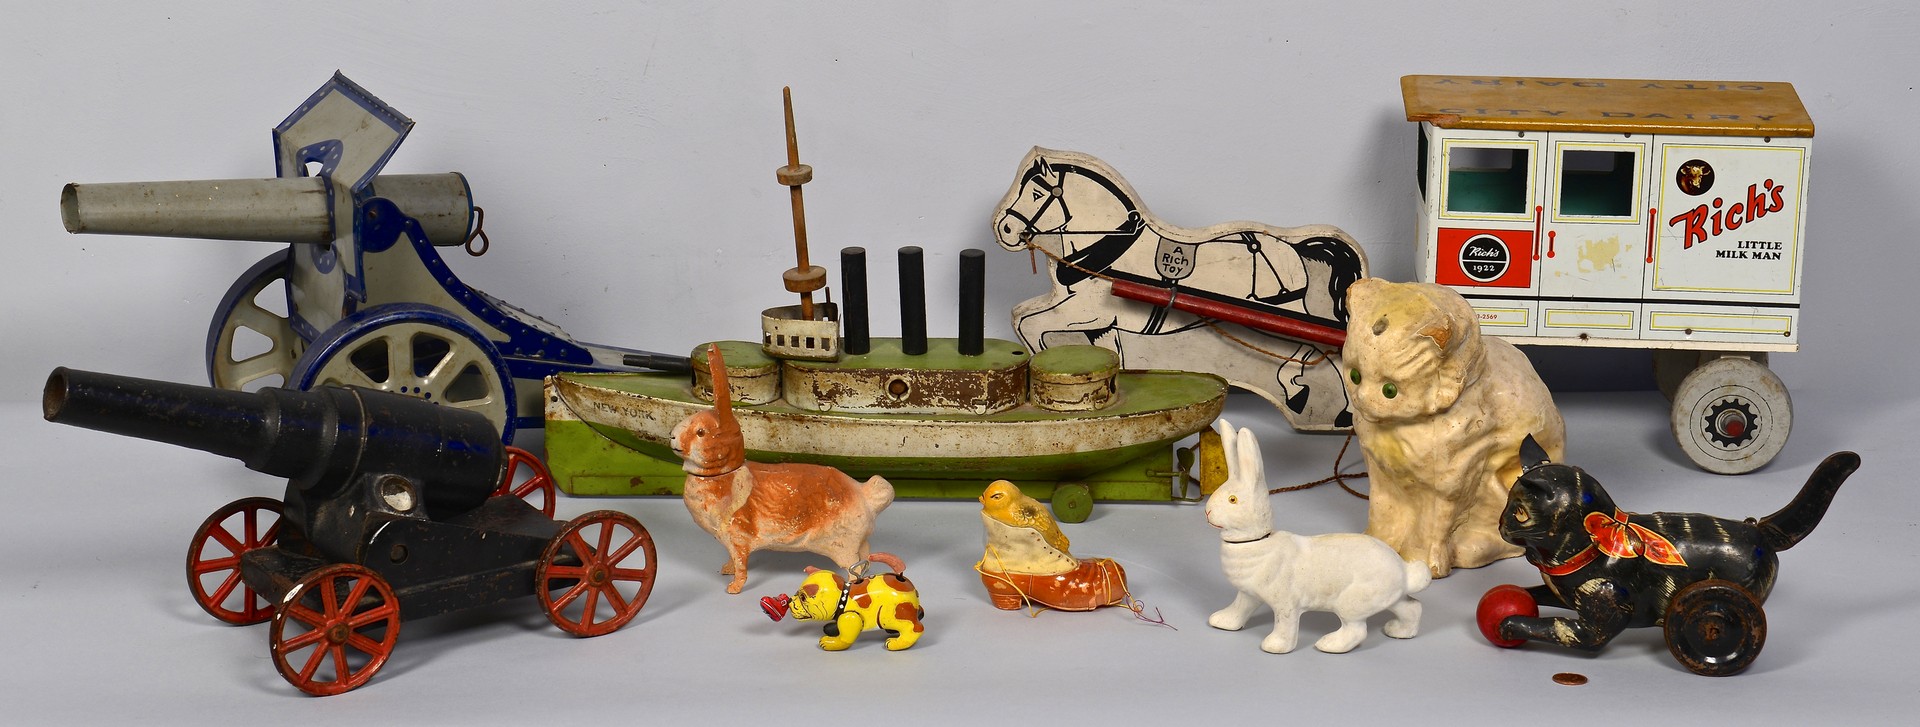 Lot 802: Grouping of Vintage Tin & Cast Iron Toys, 10 total